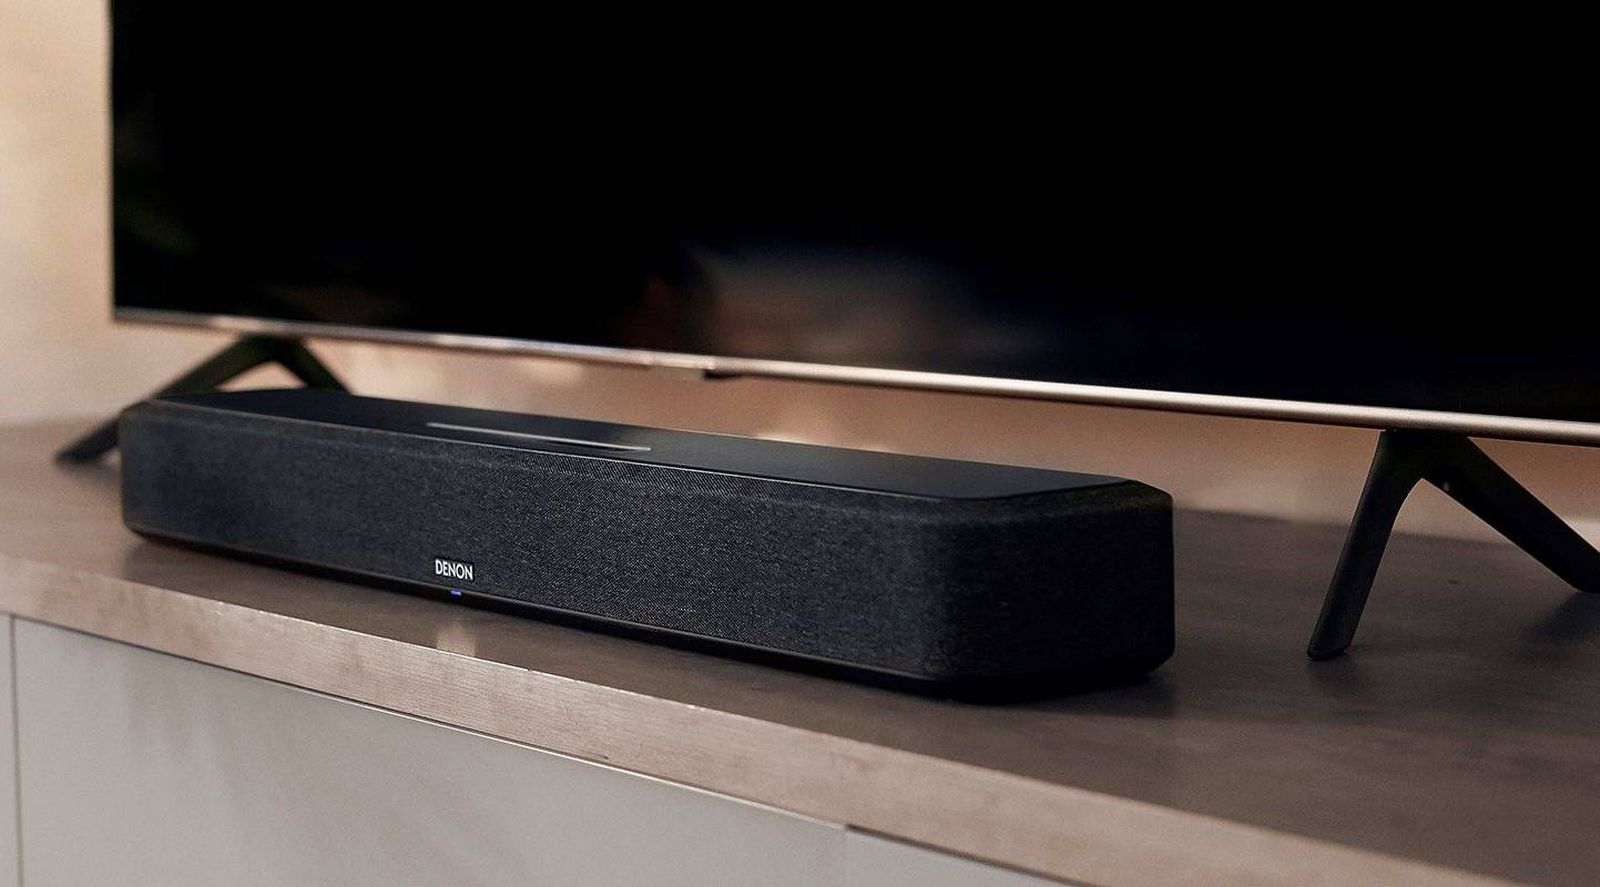 Denon launches new soundbar with Dolby Atmos, AirPlay 2 support and more